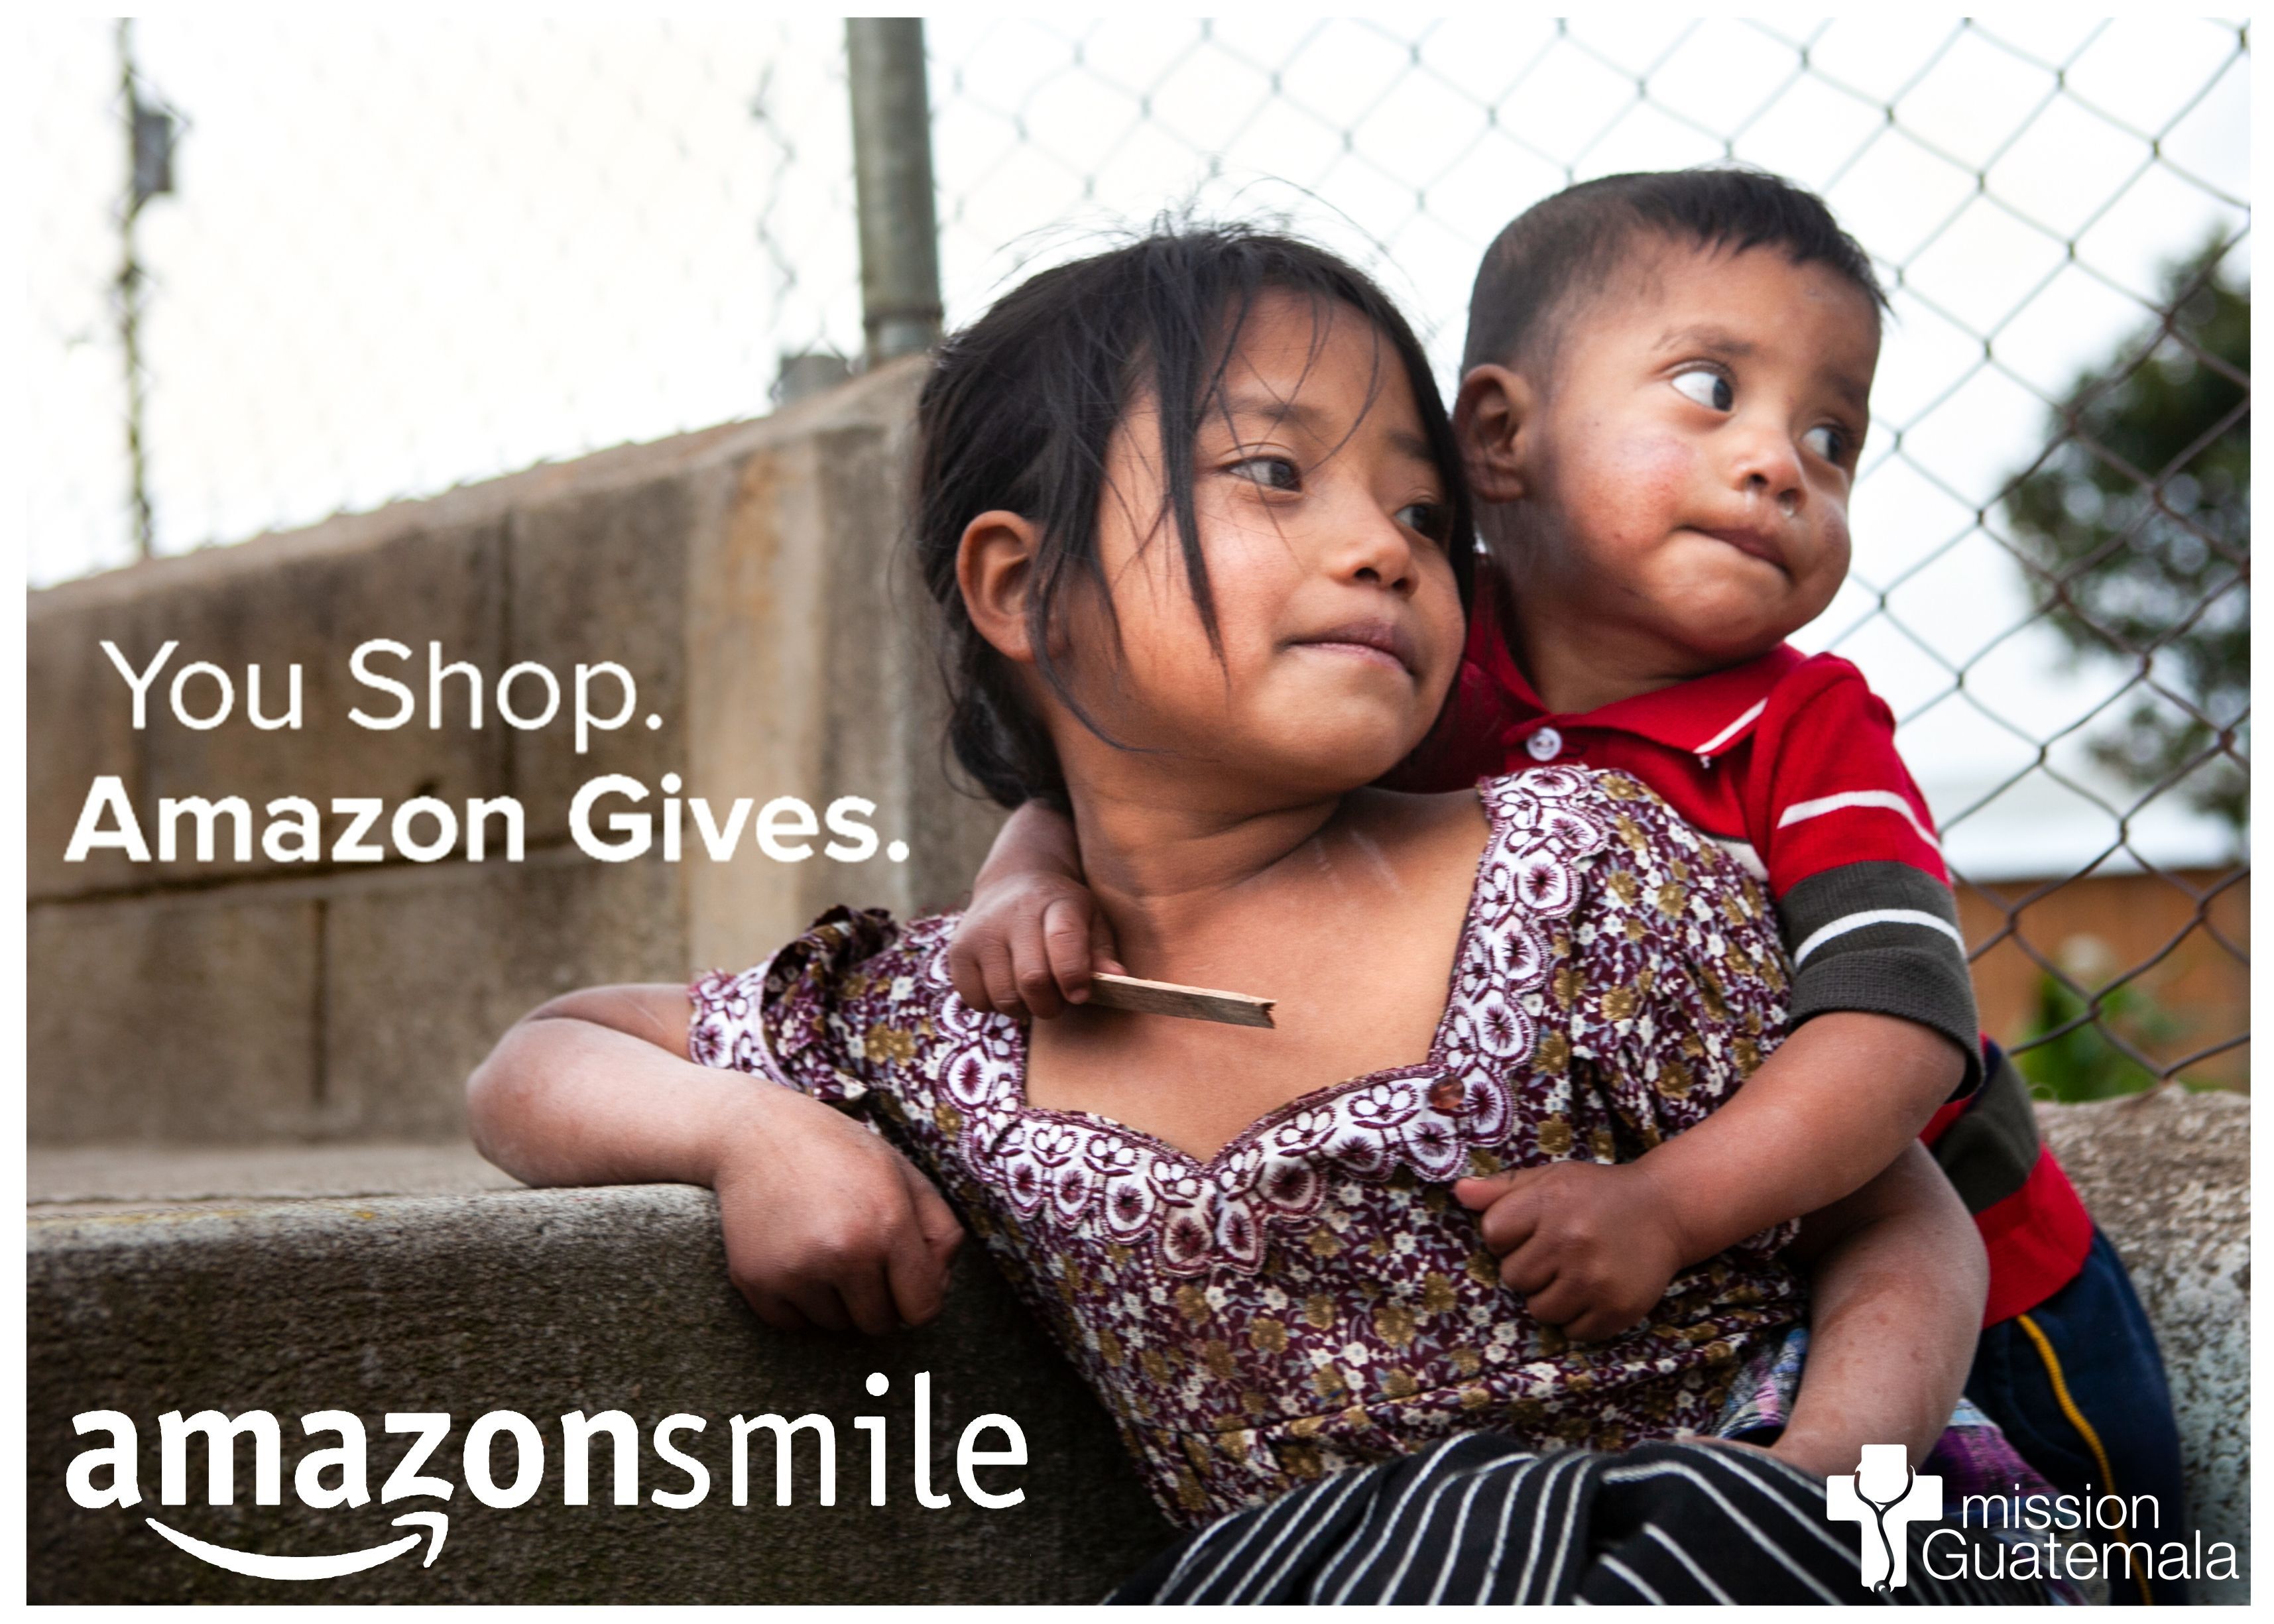 Support Mission Guatemala with Amazon Smile!